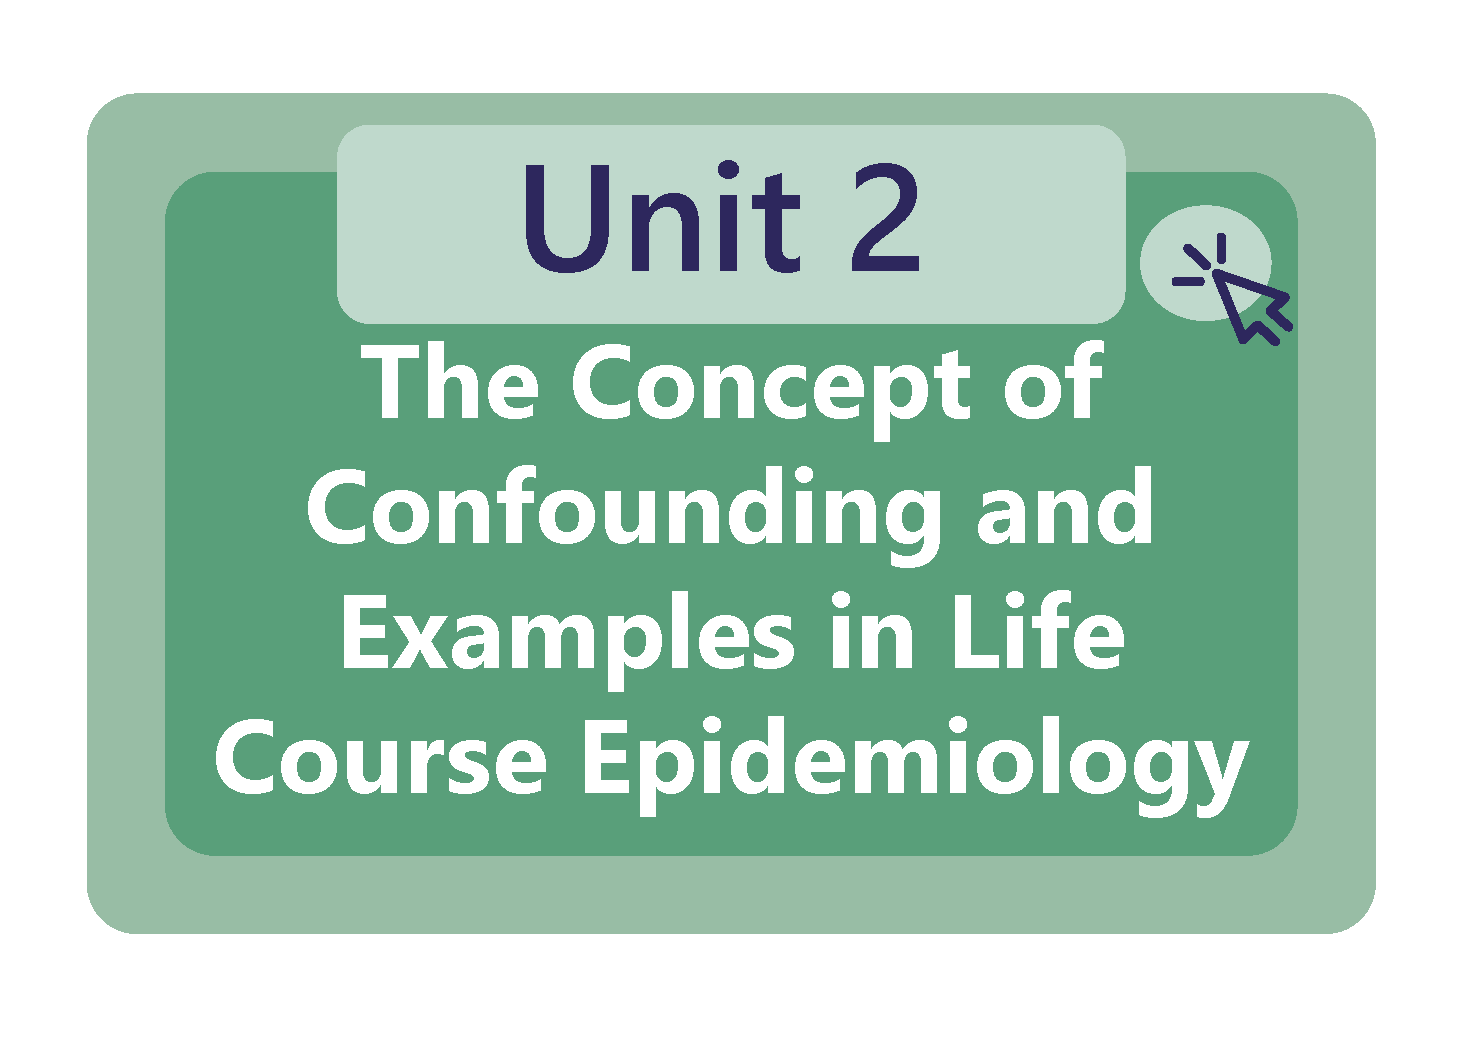 The Concept of Confounding and Examples in Life Course Epidemiology